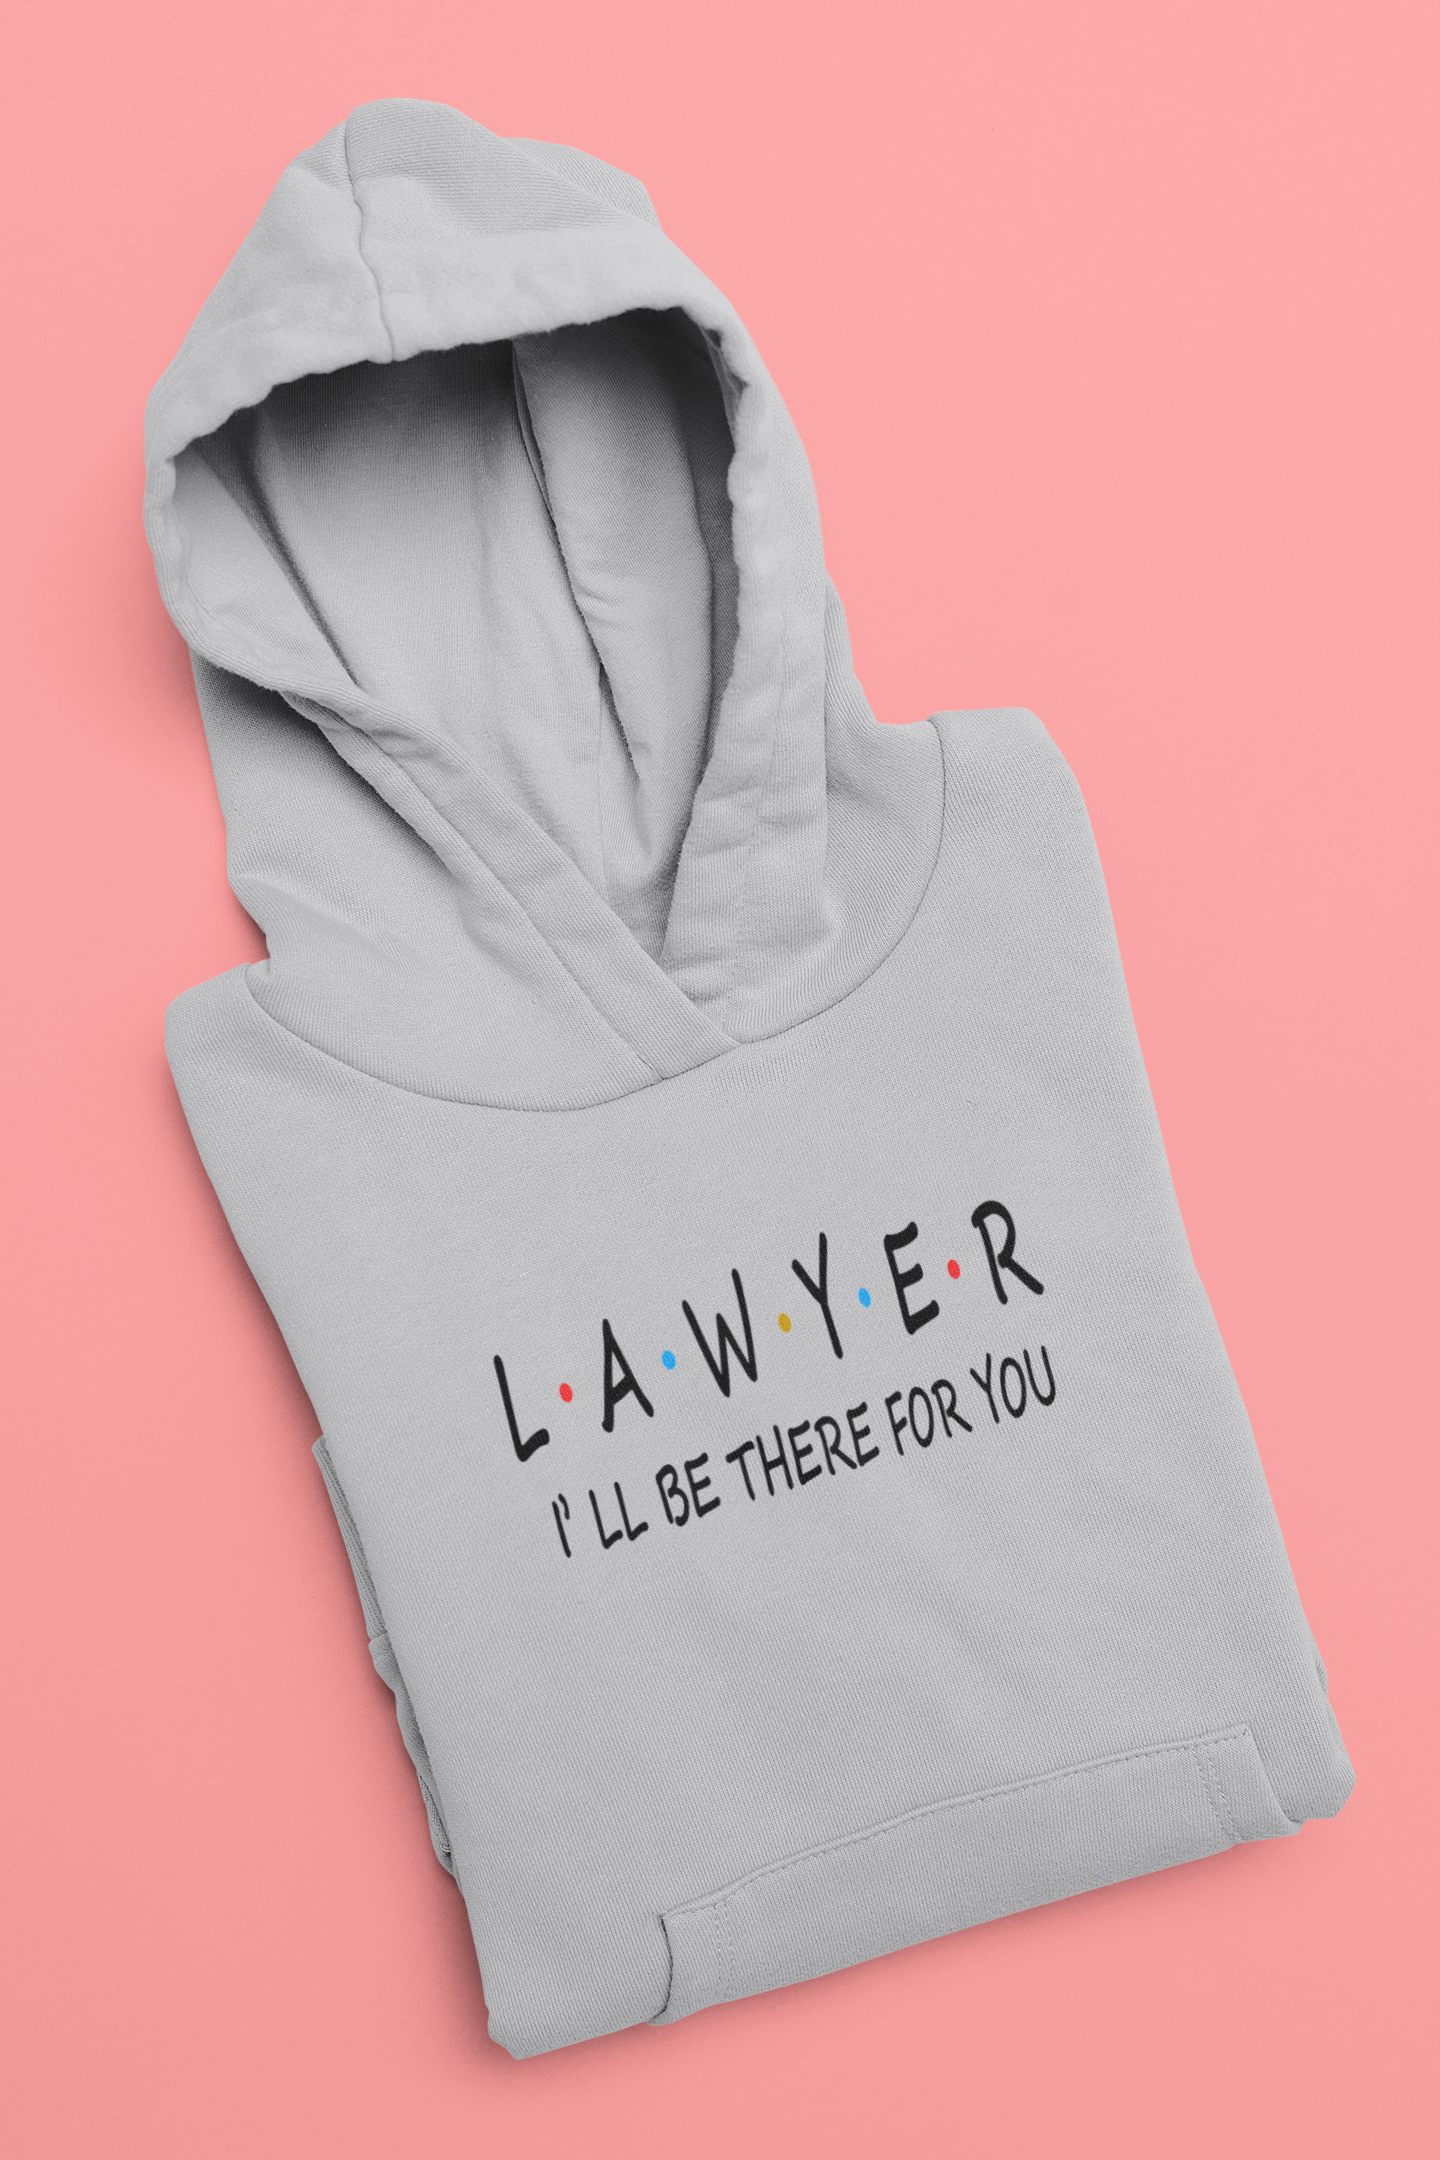 Lawyer I Will Be Their For You Men Hoodies-FunkyTeesClub